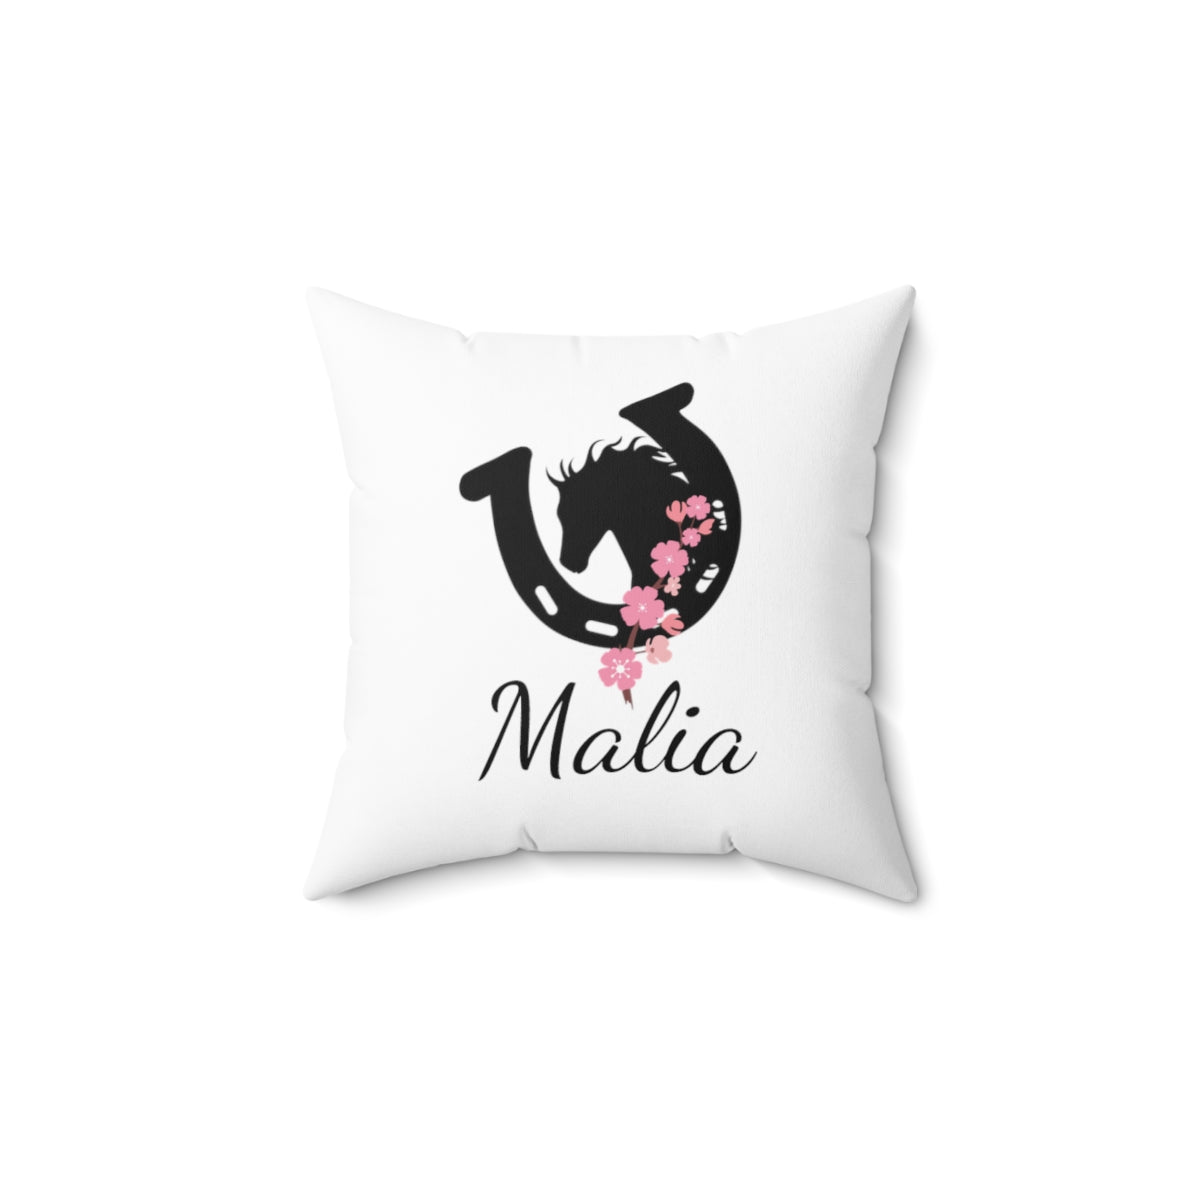 Girl's Horse Pillow / Personalized Pillow